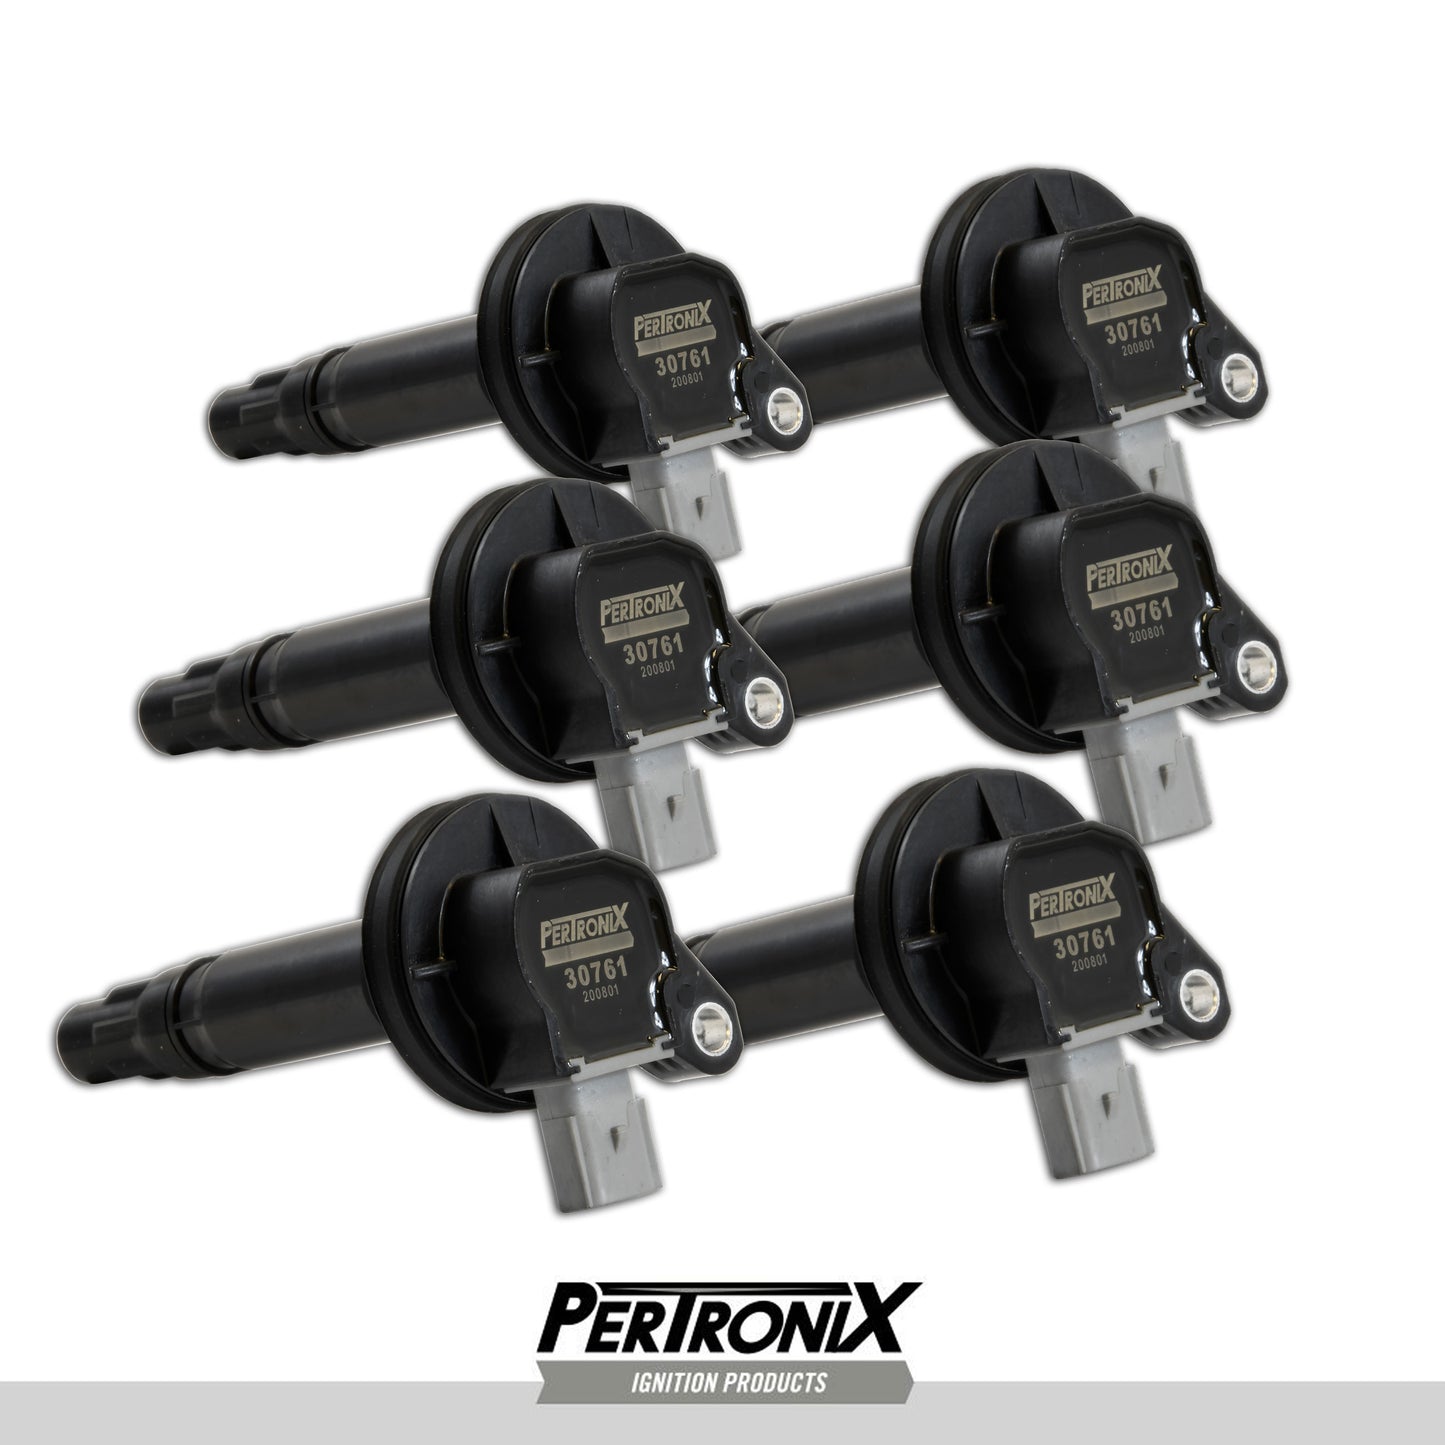 PerTronix Flame Thrower 30766 Coil Ford V6 EcoBoost, 2-Pin Gray, Set of 6